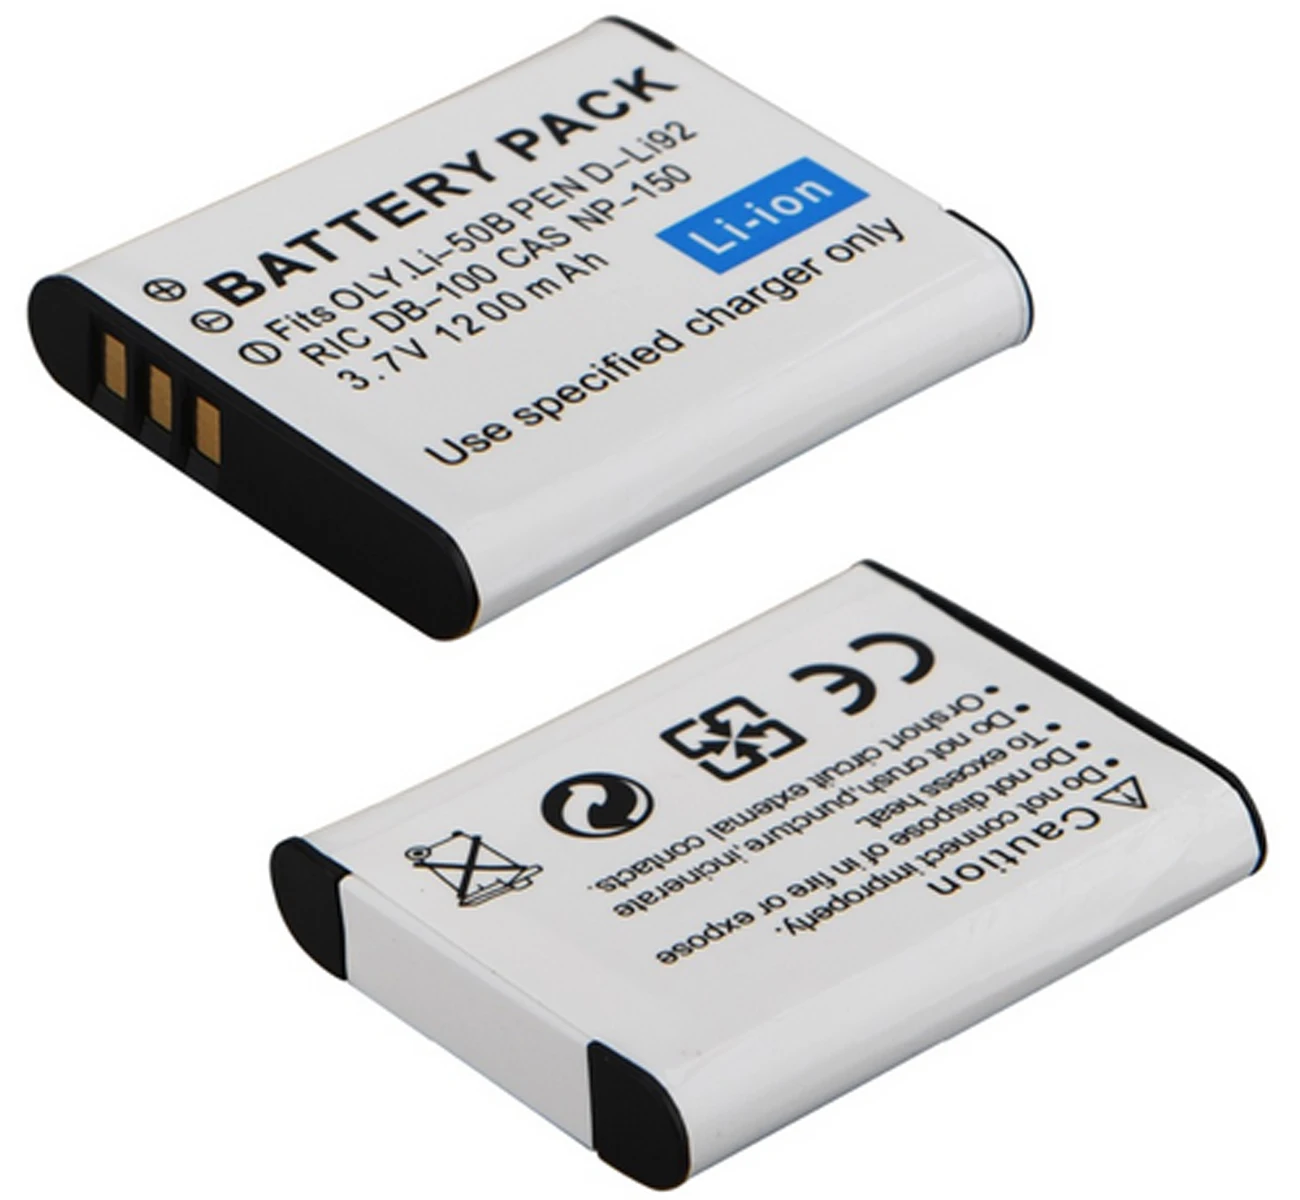 Battery Pack for Olympus Stylus Tough 1010, 1020, 1030 SW, 1030SW, 6000, 6010, 6020, 8000, 8010, 9000, 9010 Digital Camera images - 6